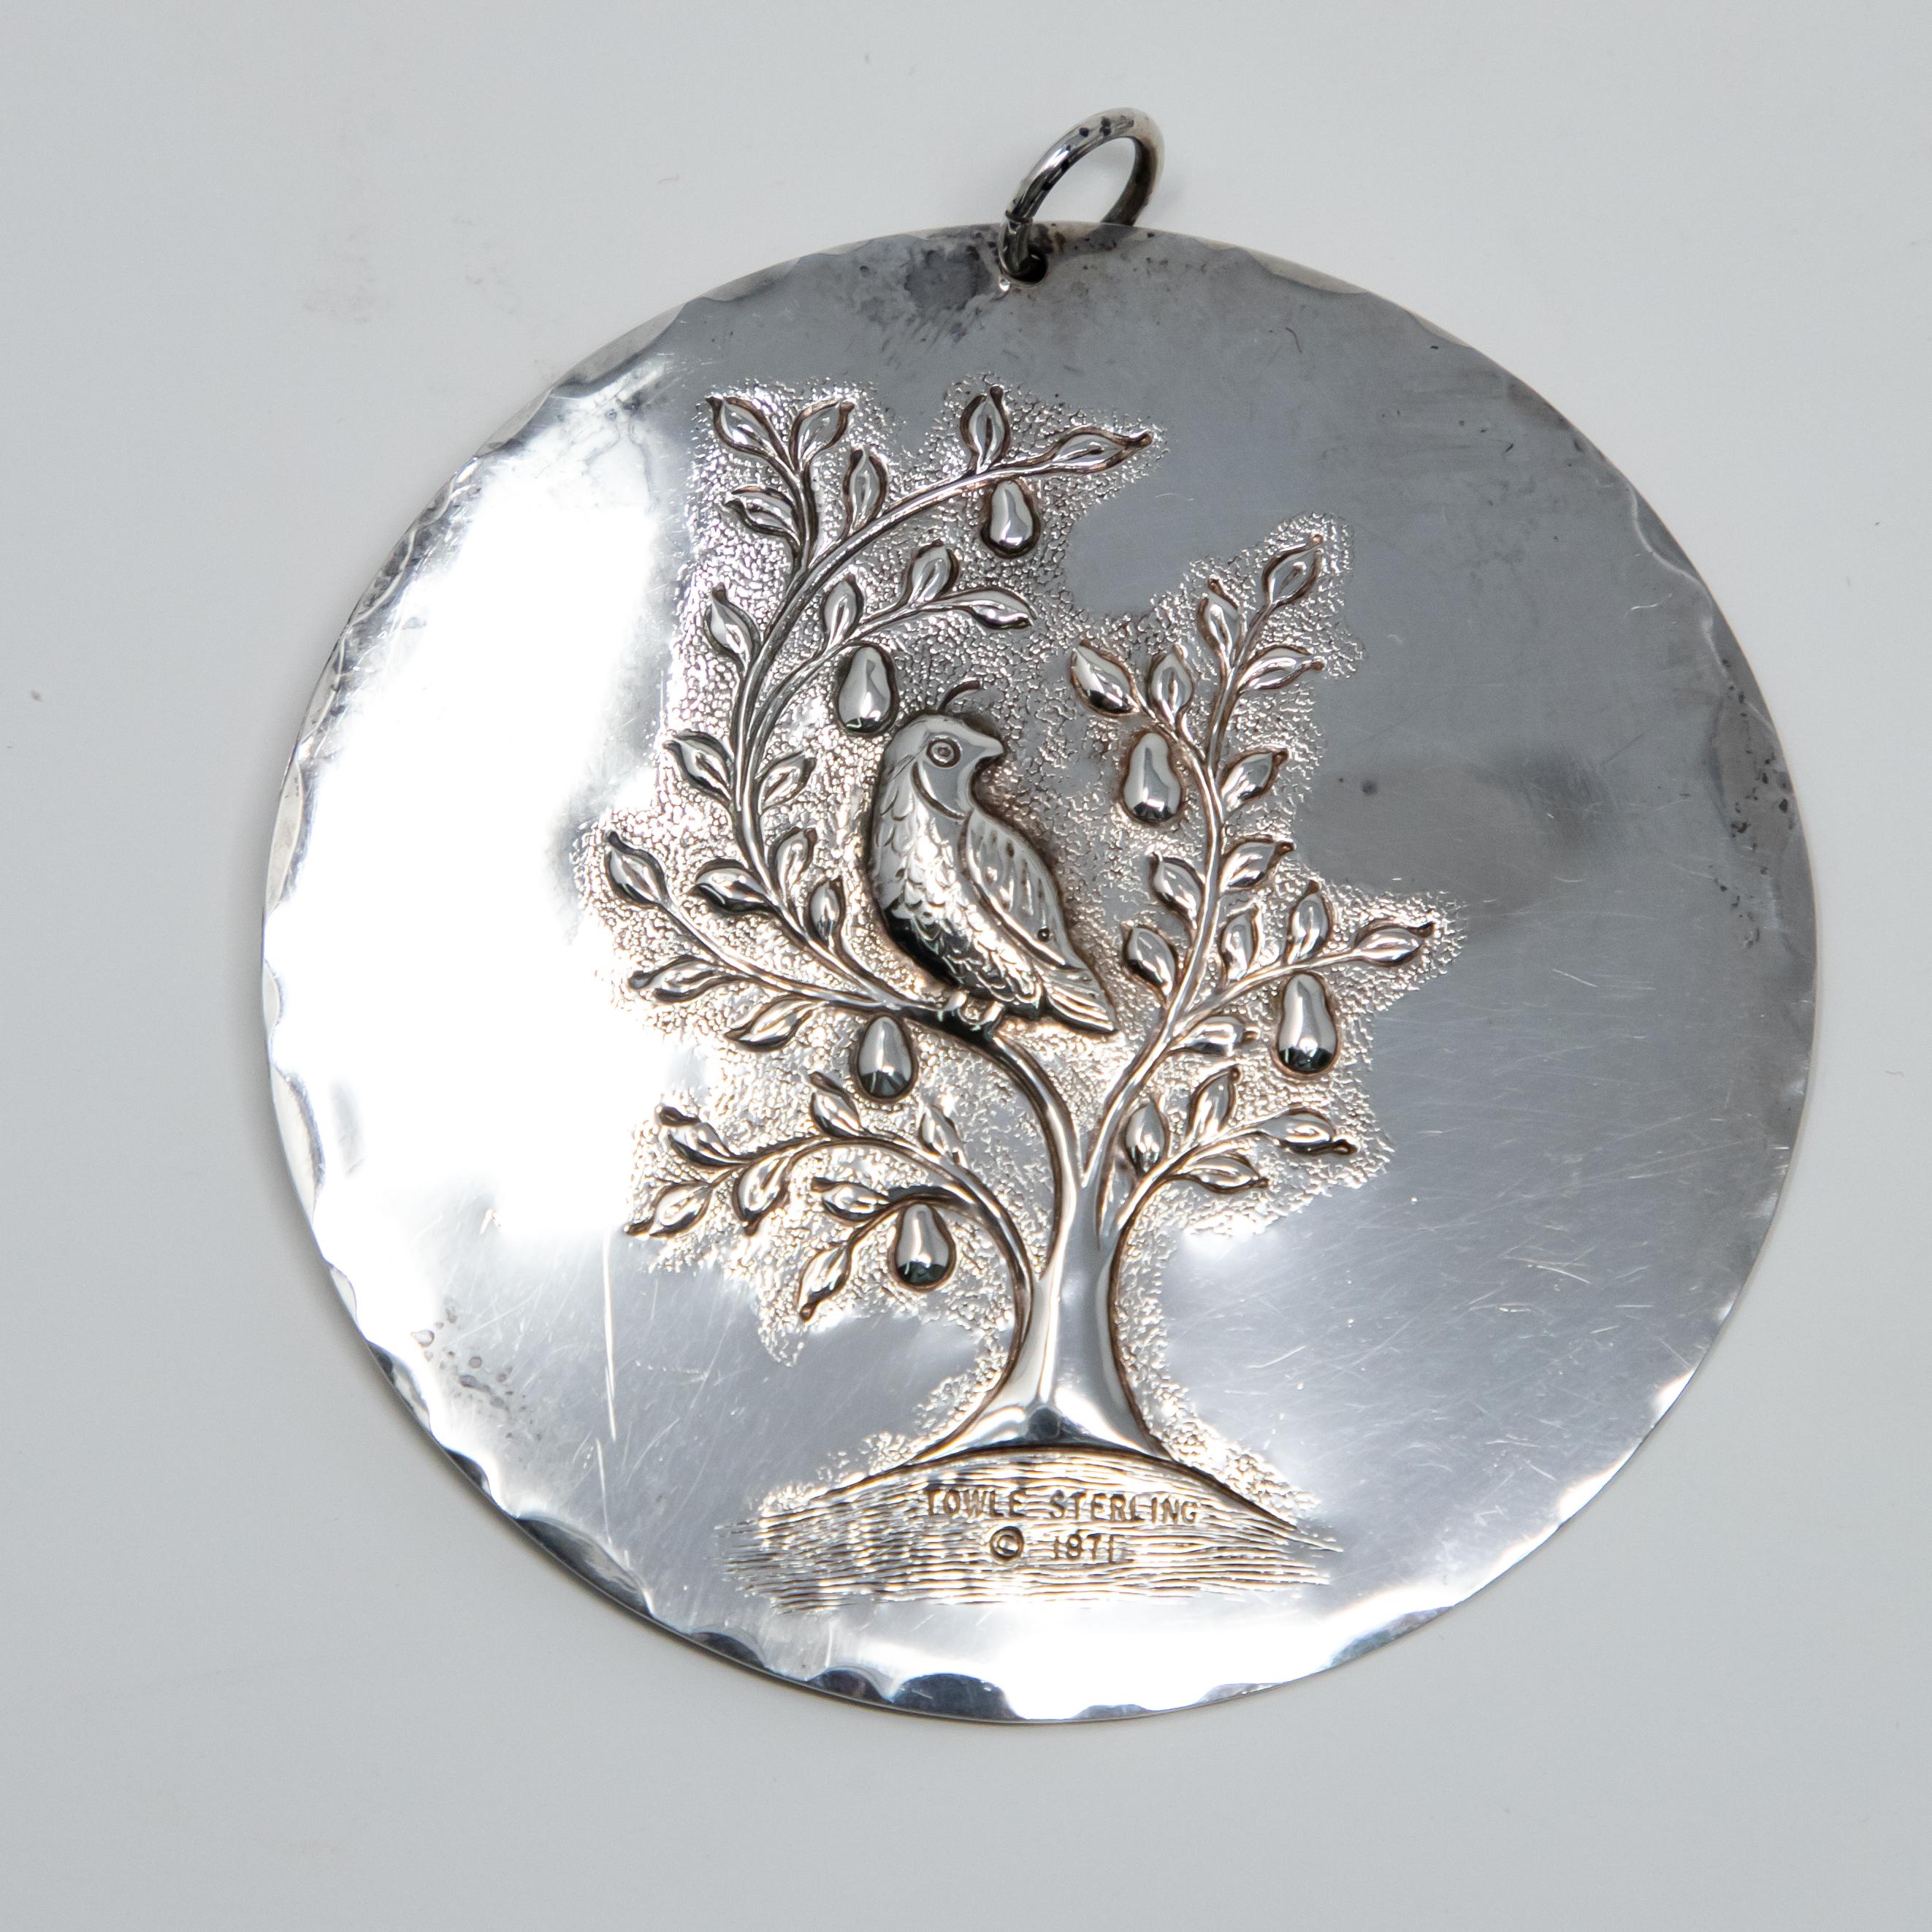 Offering this stunning Towle sterling ornament from 1971. Front depicts a partridge in a pear tree. Marked under the tree Towle sterling, 1971. The back depicts the dove of peace.